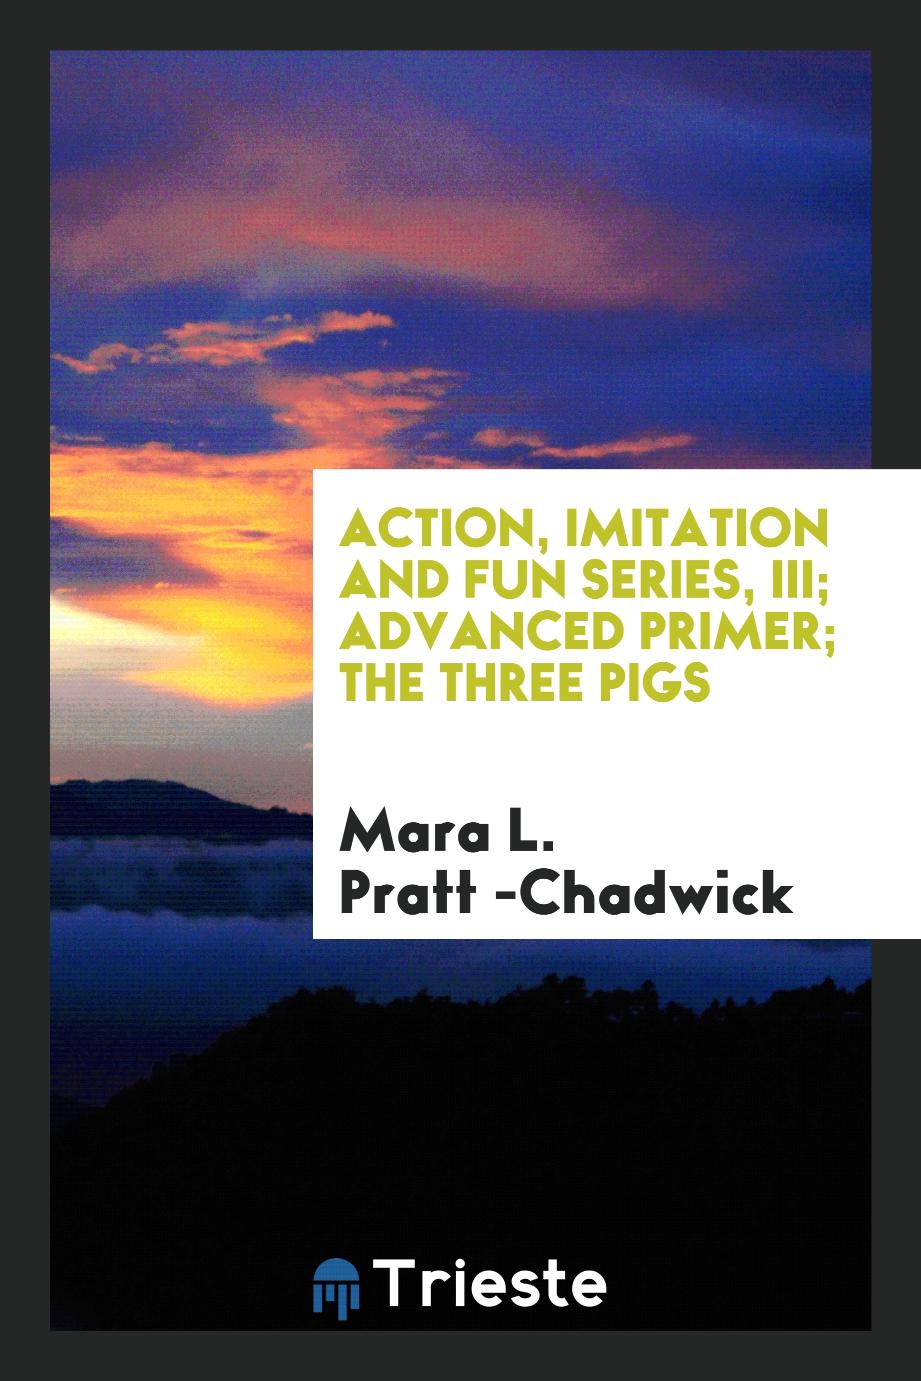 Action, Imitation and Fun Series, III; Advanced Primer; The Three Pigs